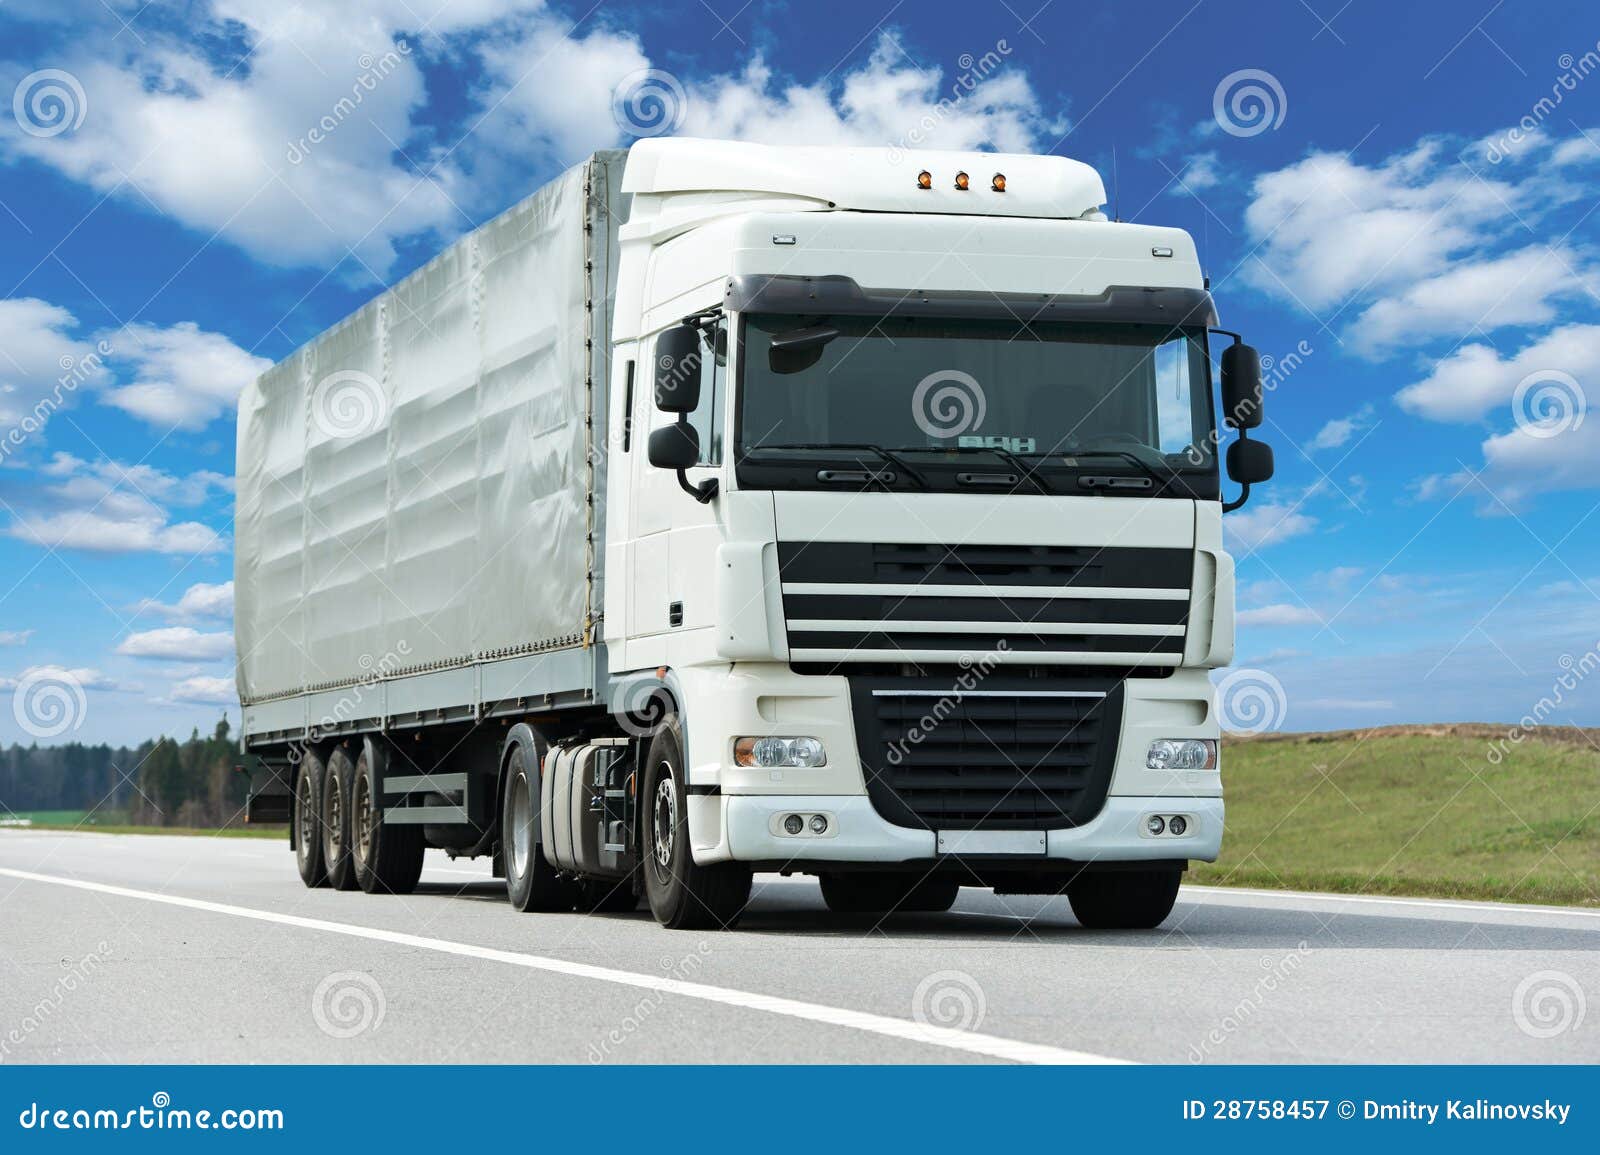 White Lorry With Grey Trailer Over Blue Sky Stock Image  Image: 28758457